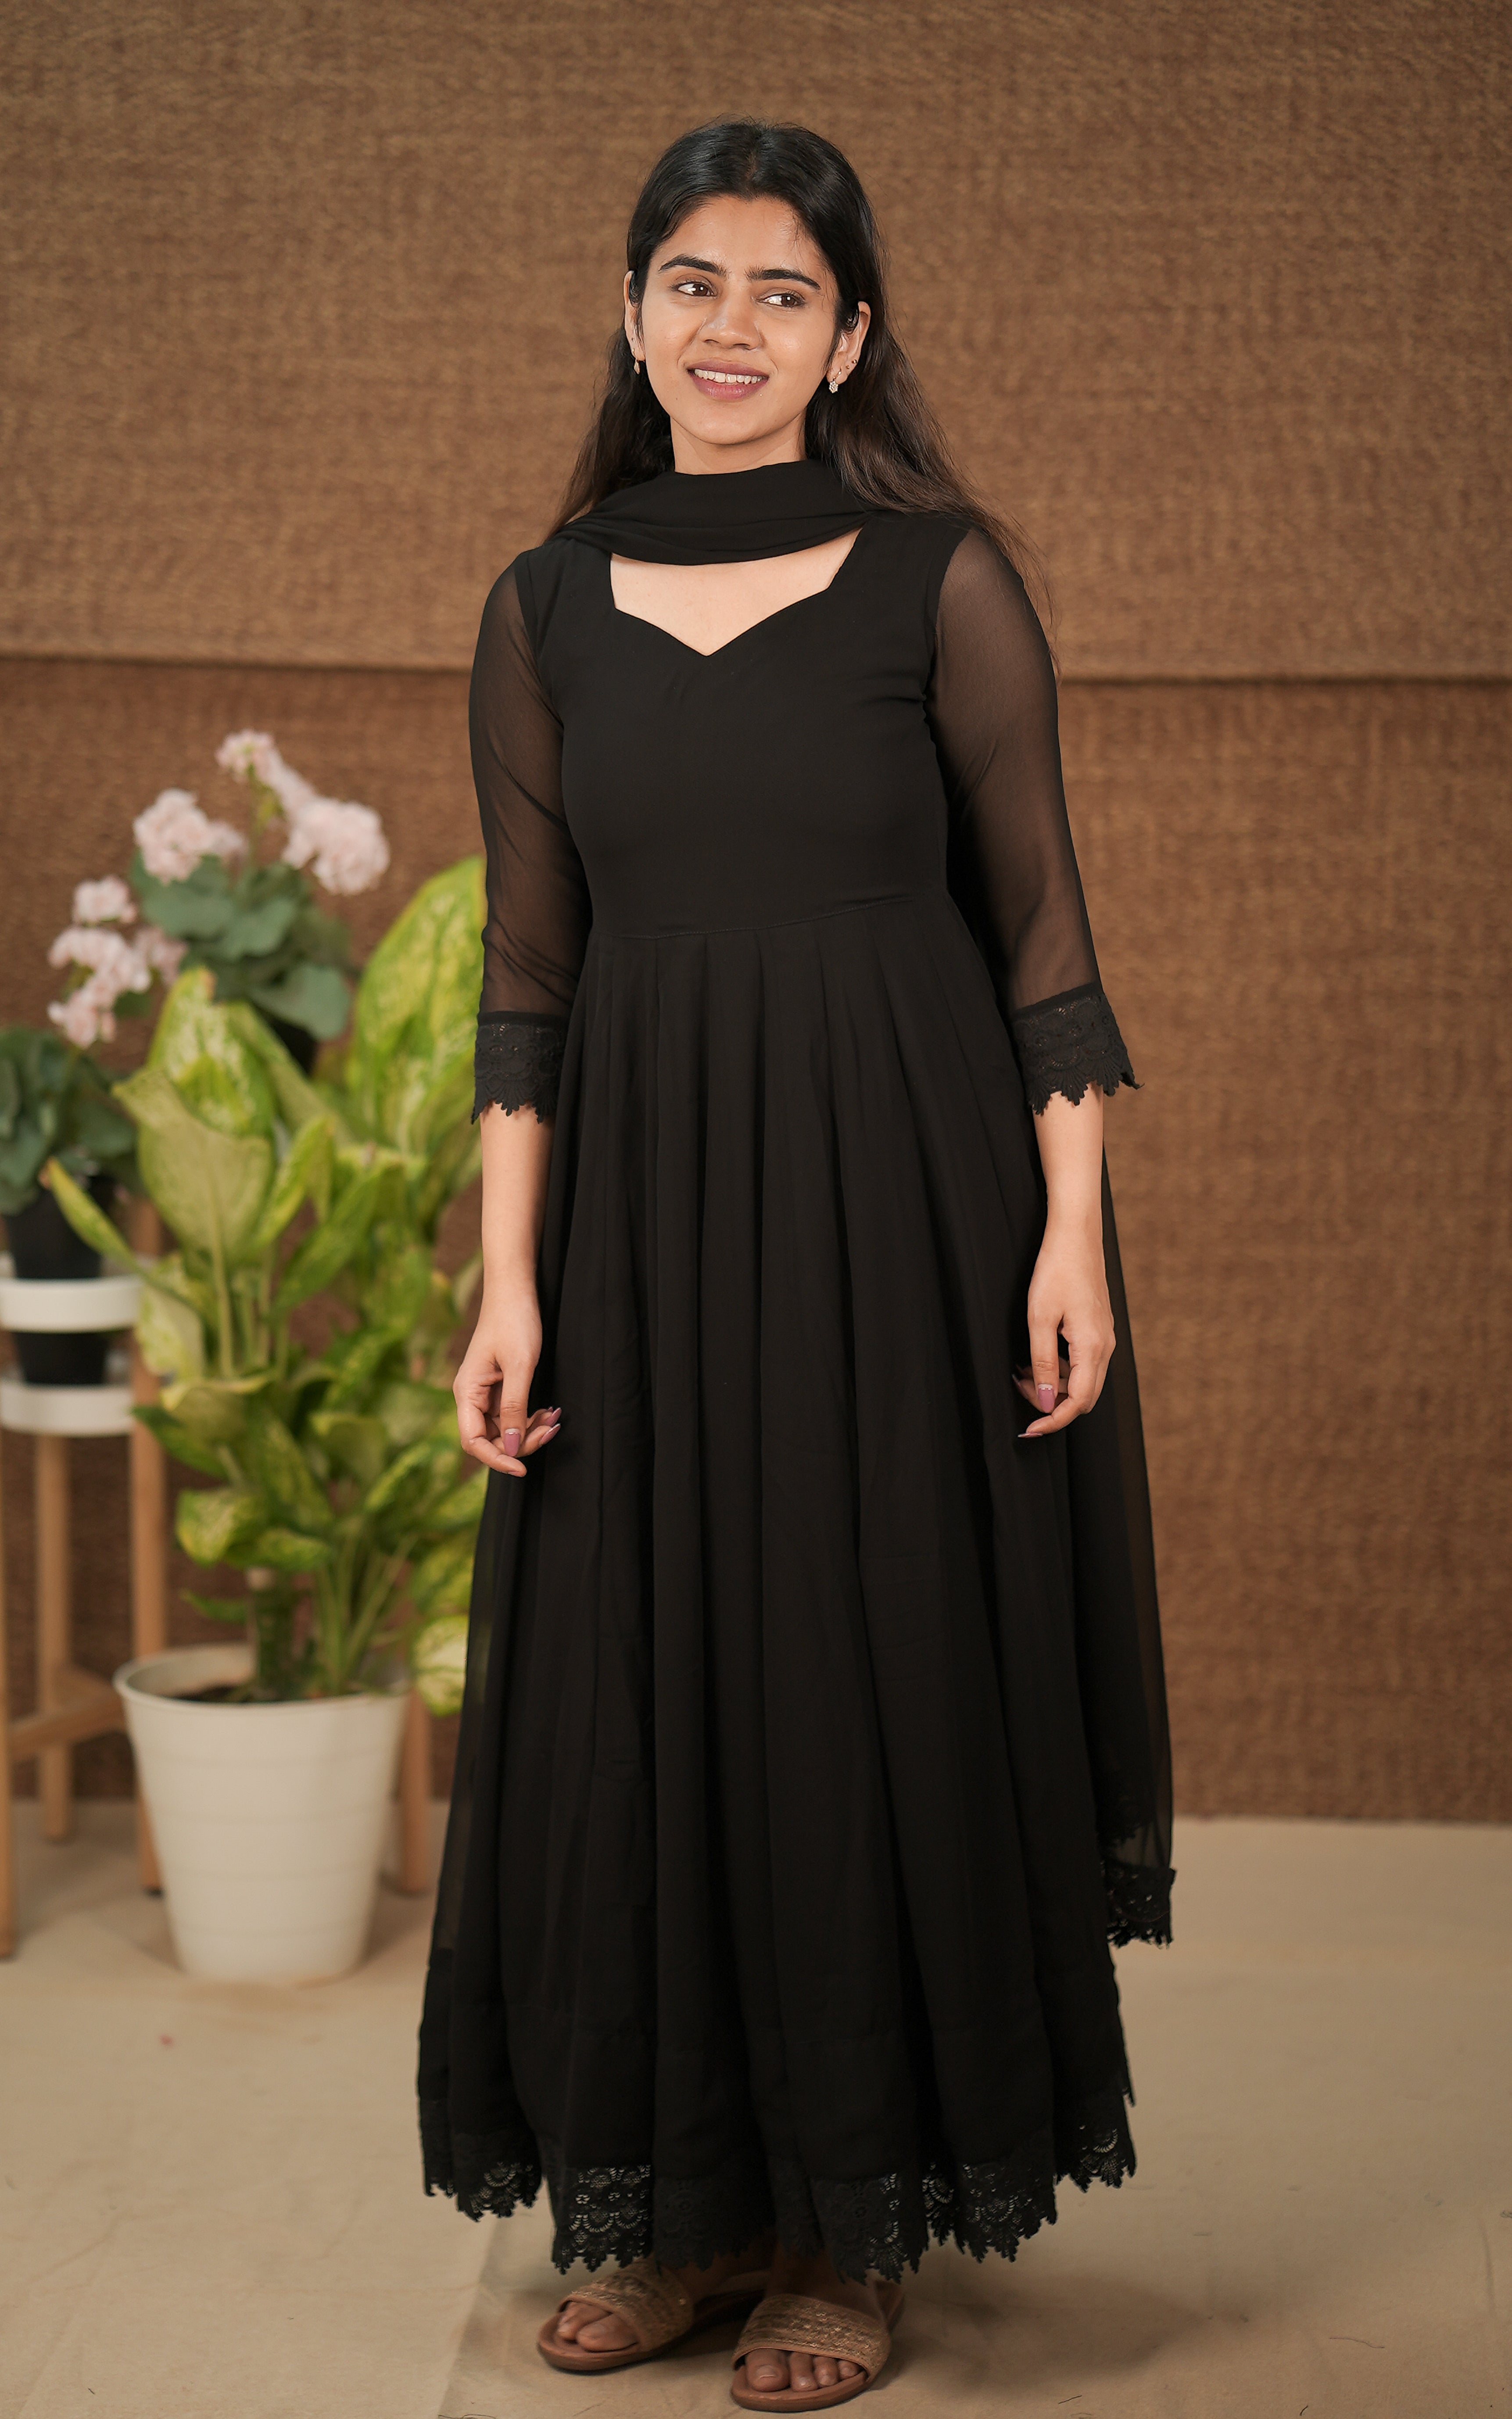 instore kurti melodic black (kurti+dupatta) georgette with butter crepe lining full flared anarkali with crochet lace border color: black